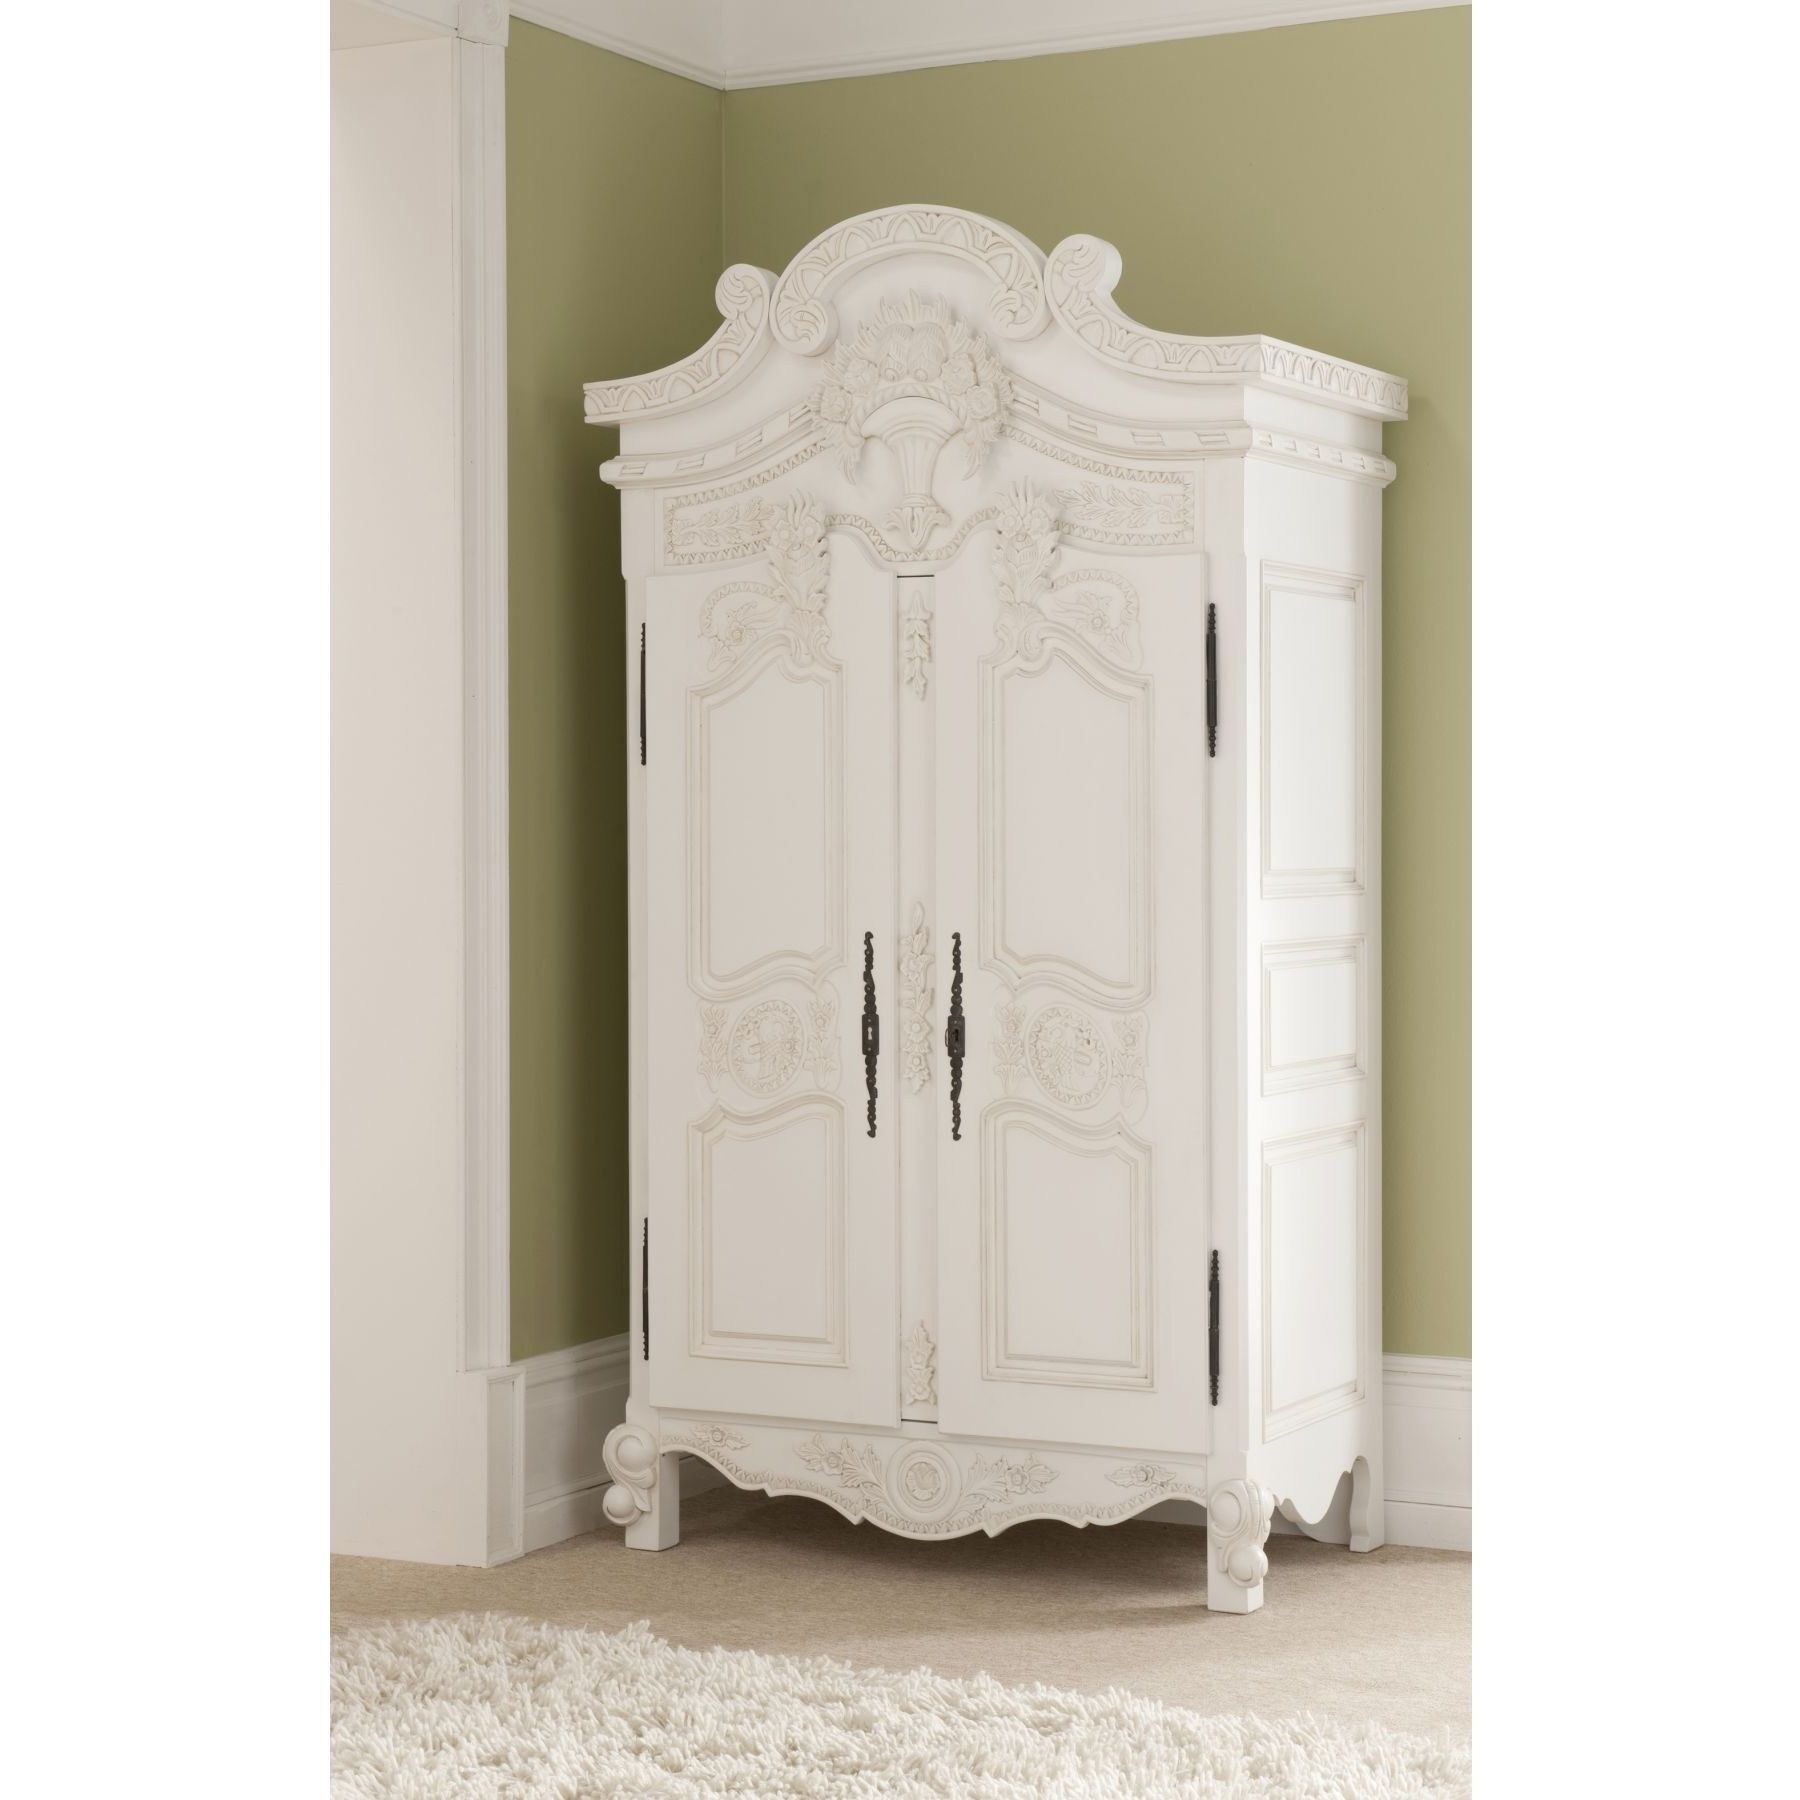 White French Style Wardrobes Regarding Most Recent Rococo Antique French Wardrobe A Stunning Addition To Our Shabby (View 6 of 15)